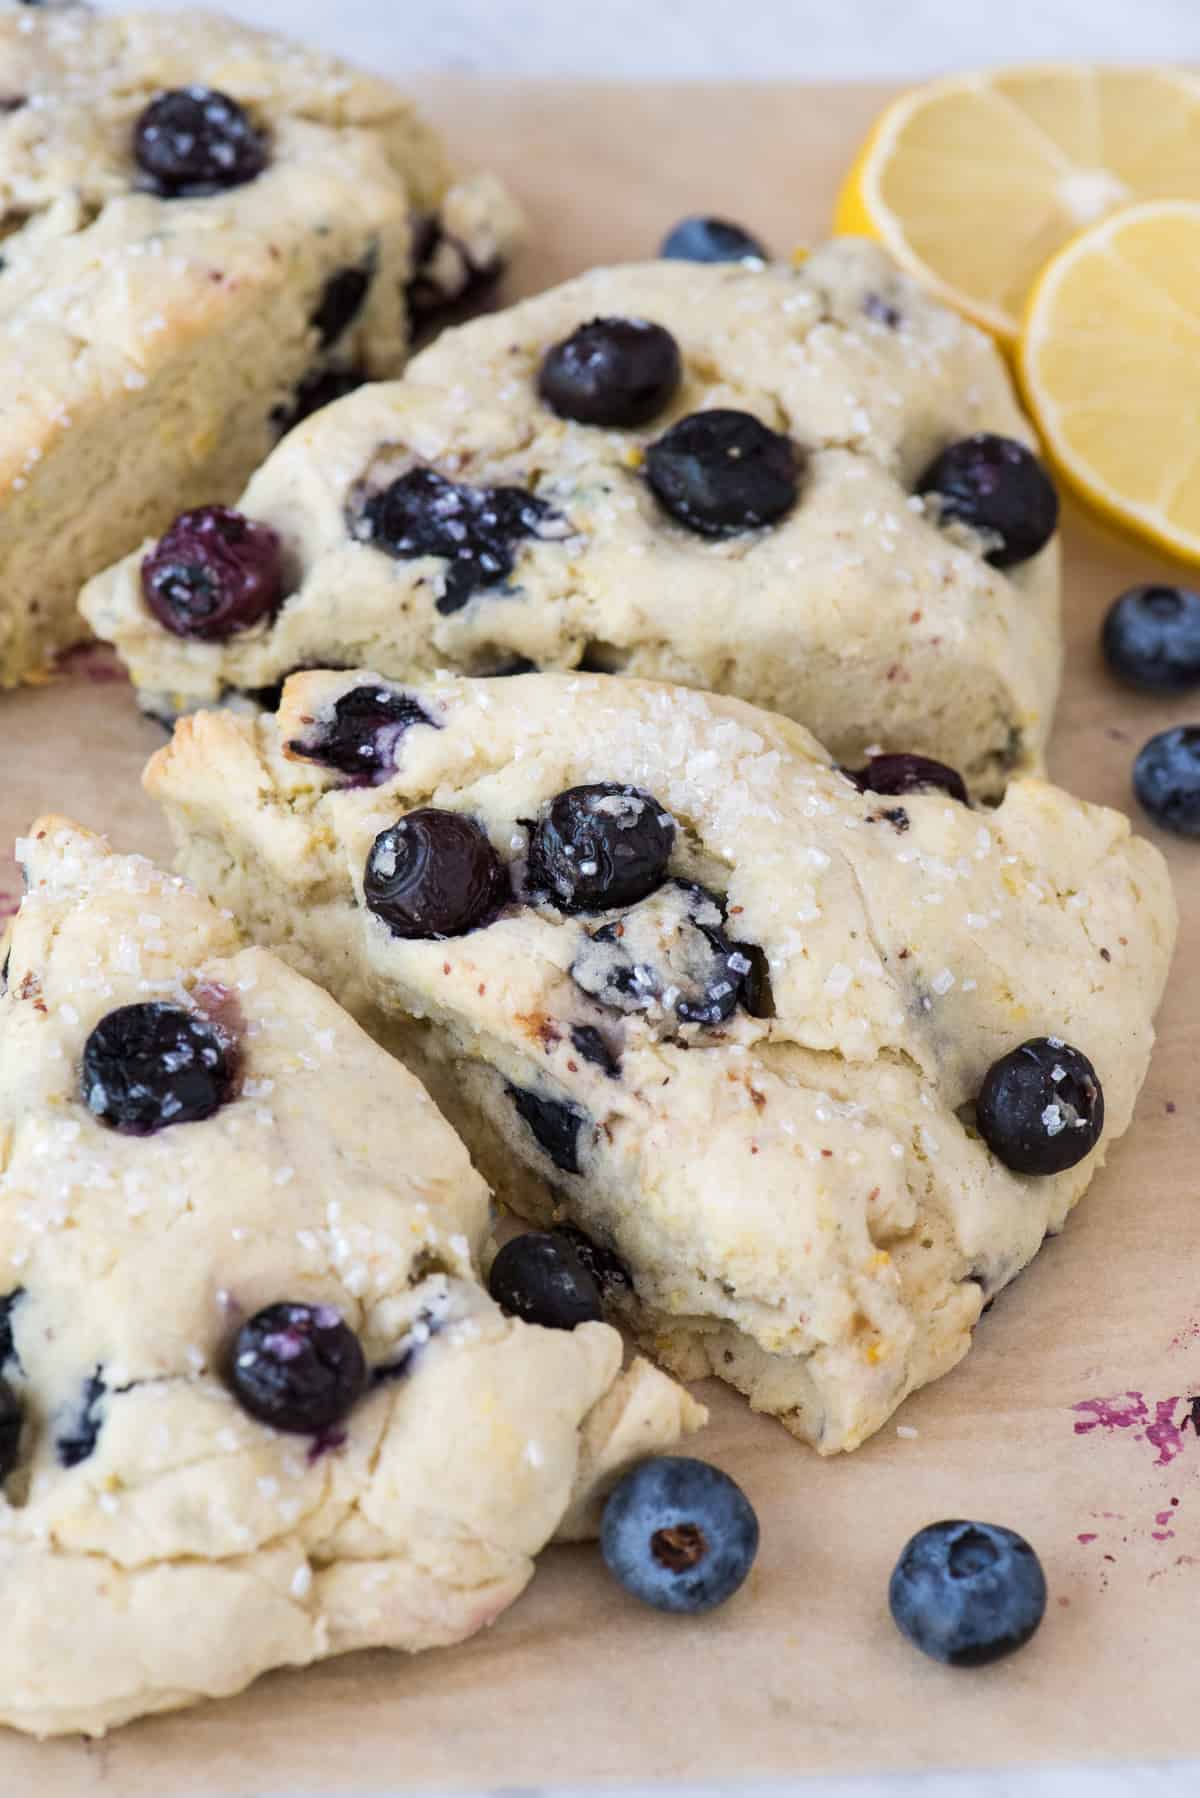 lemon blueberry scones on brown parchment paper with lemon slices and blueberries